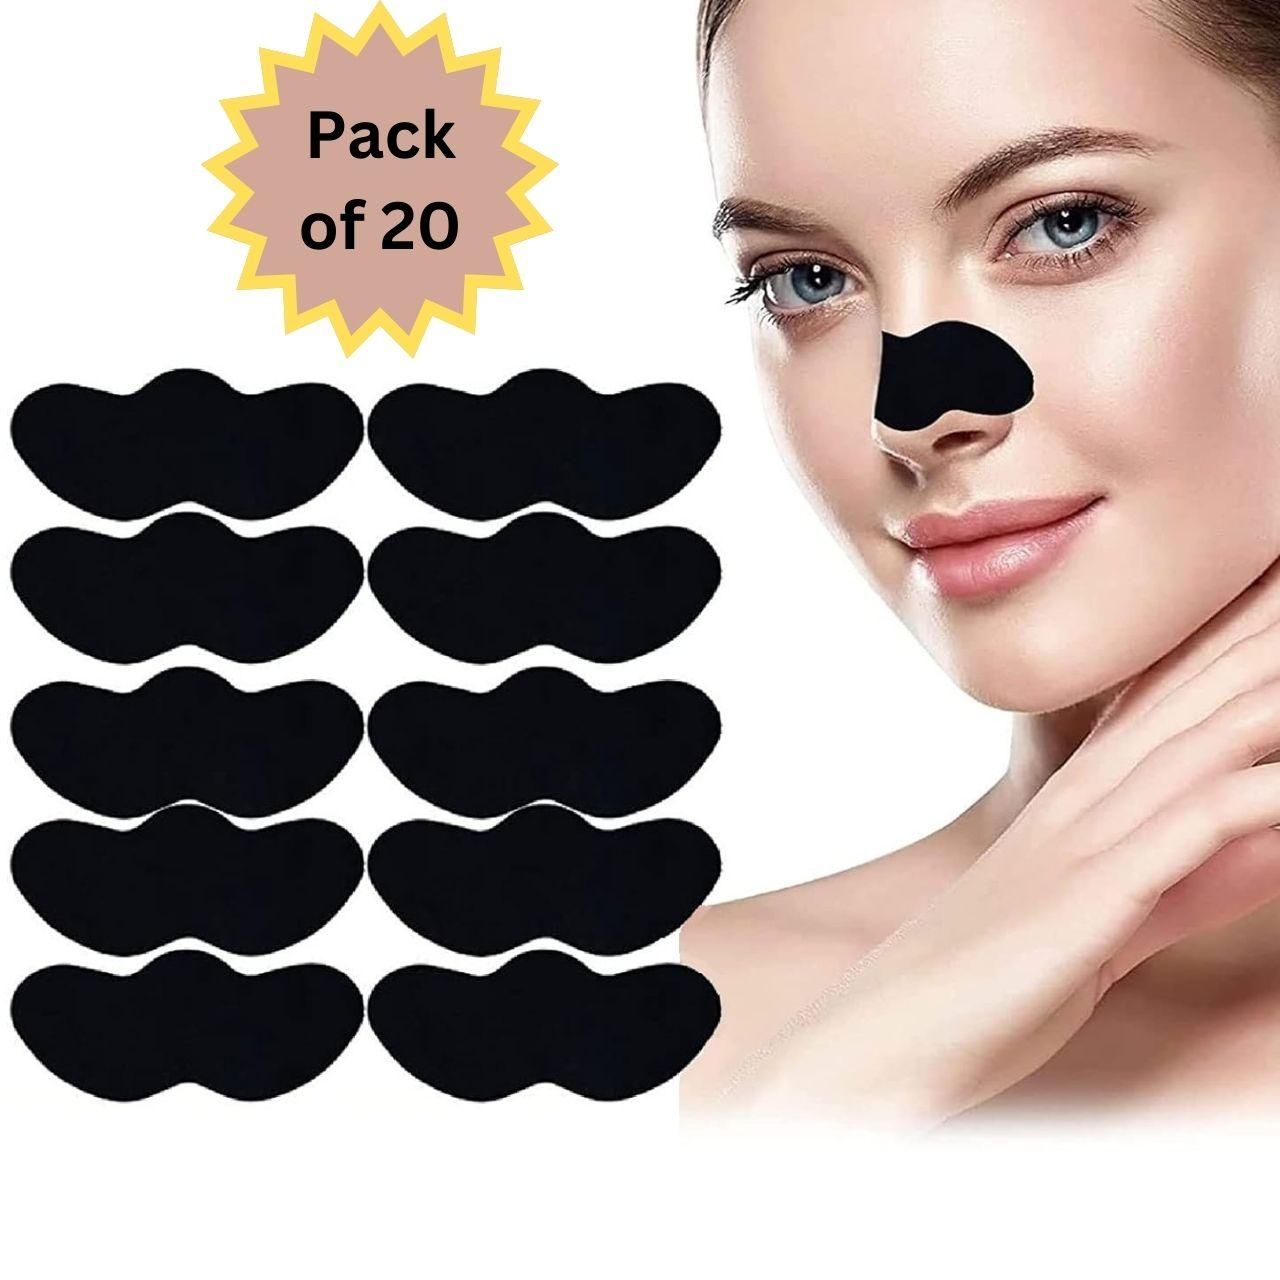 Deep Cleansing Blackhead Remover Strips (Pack of 20)